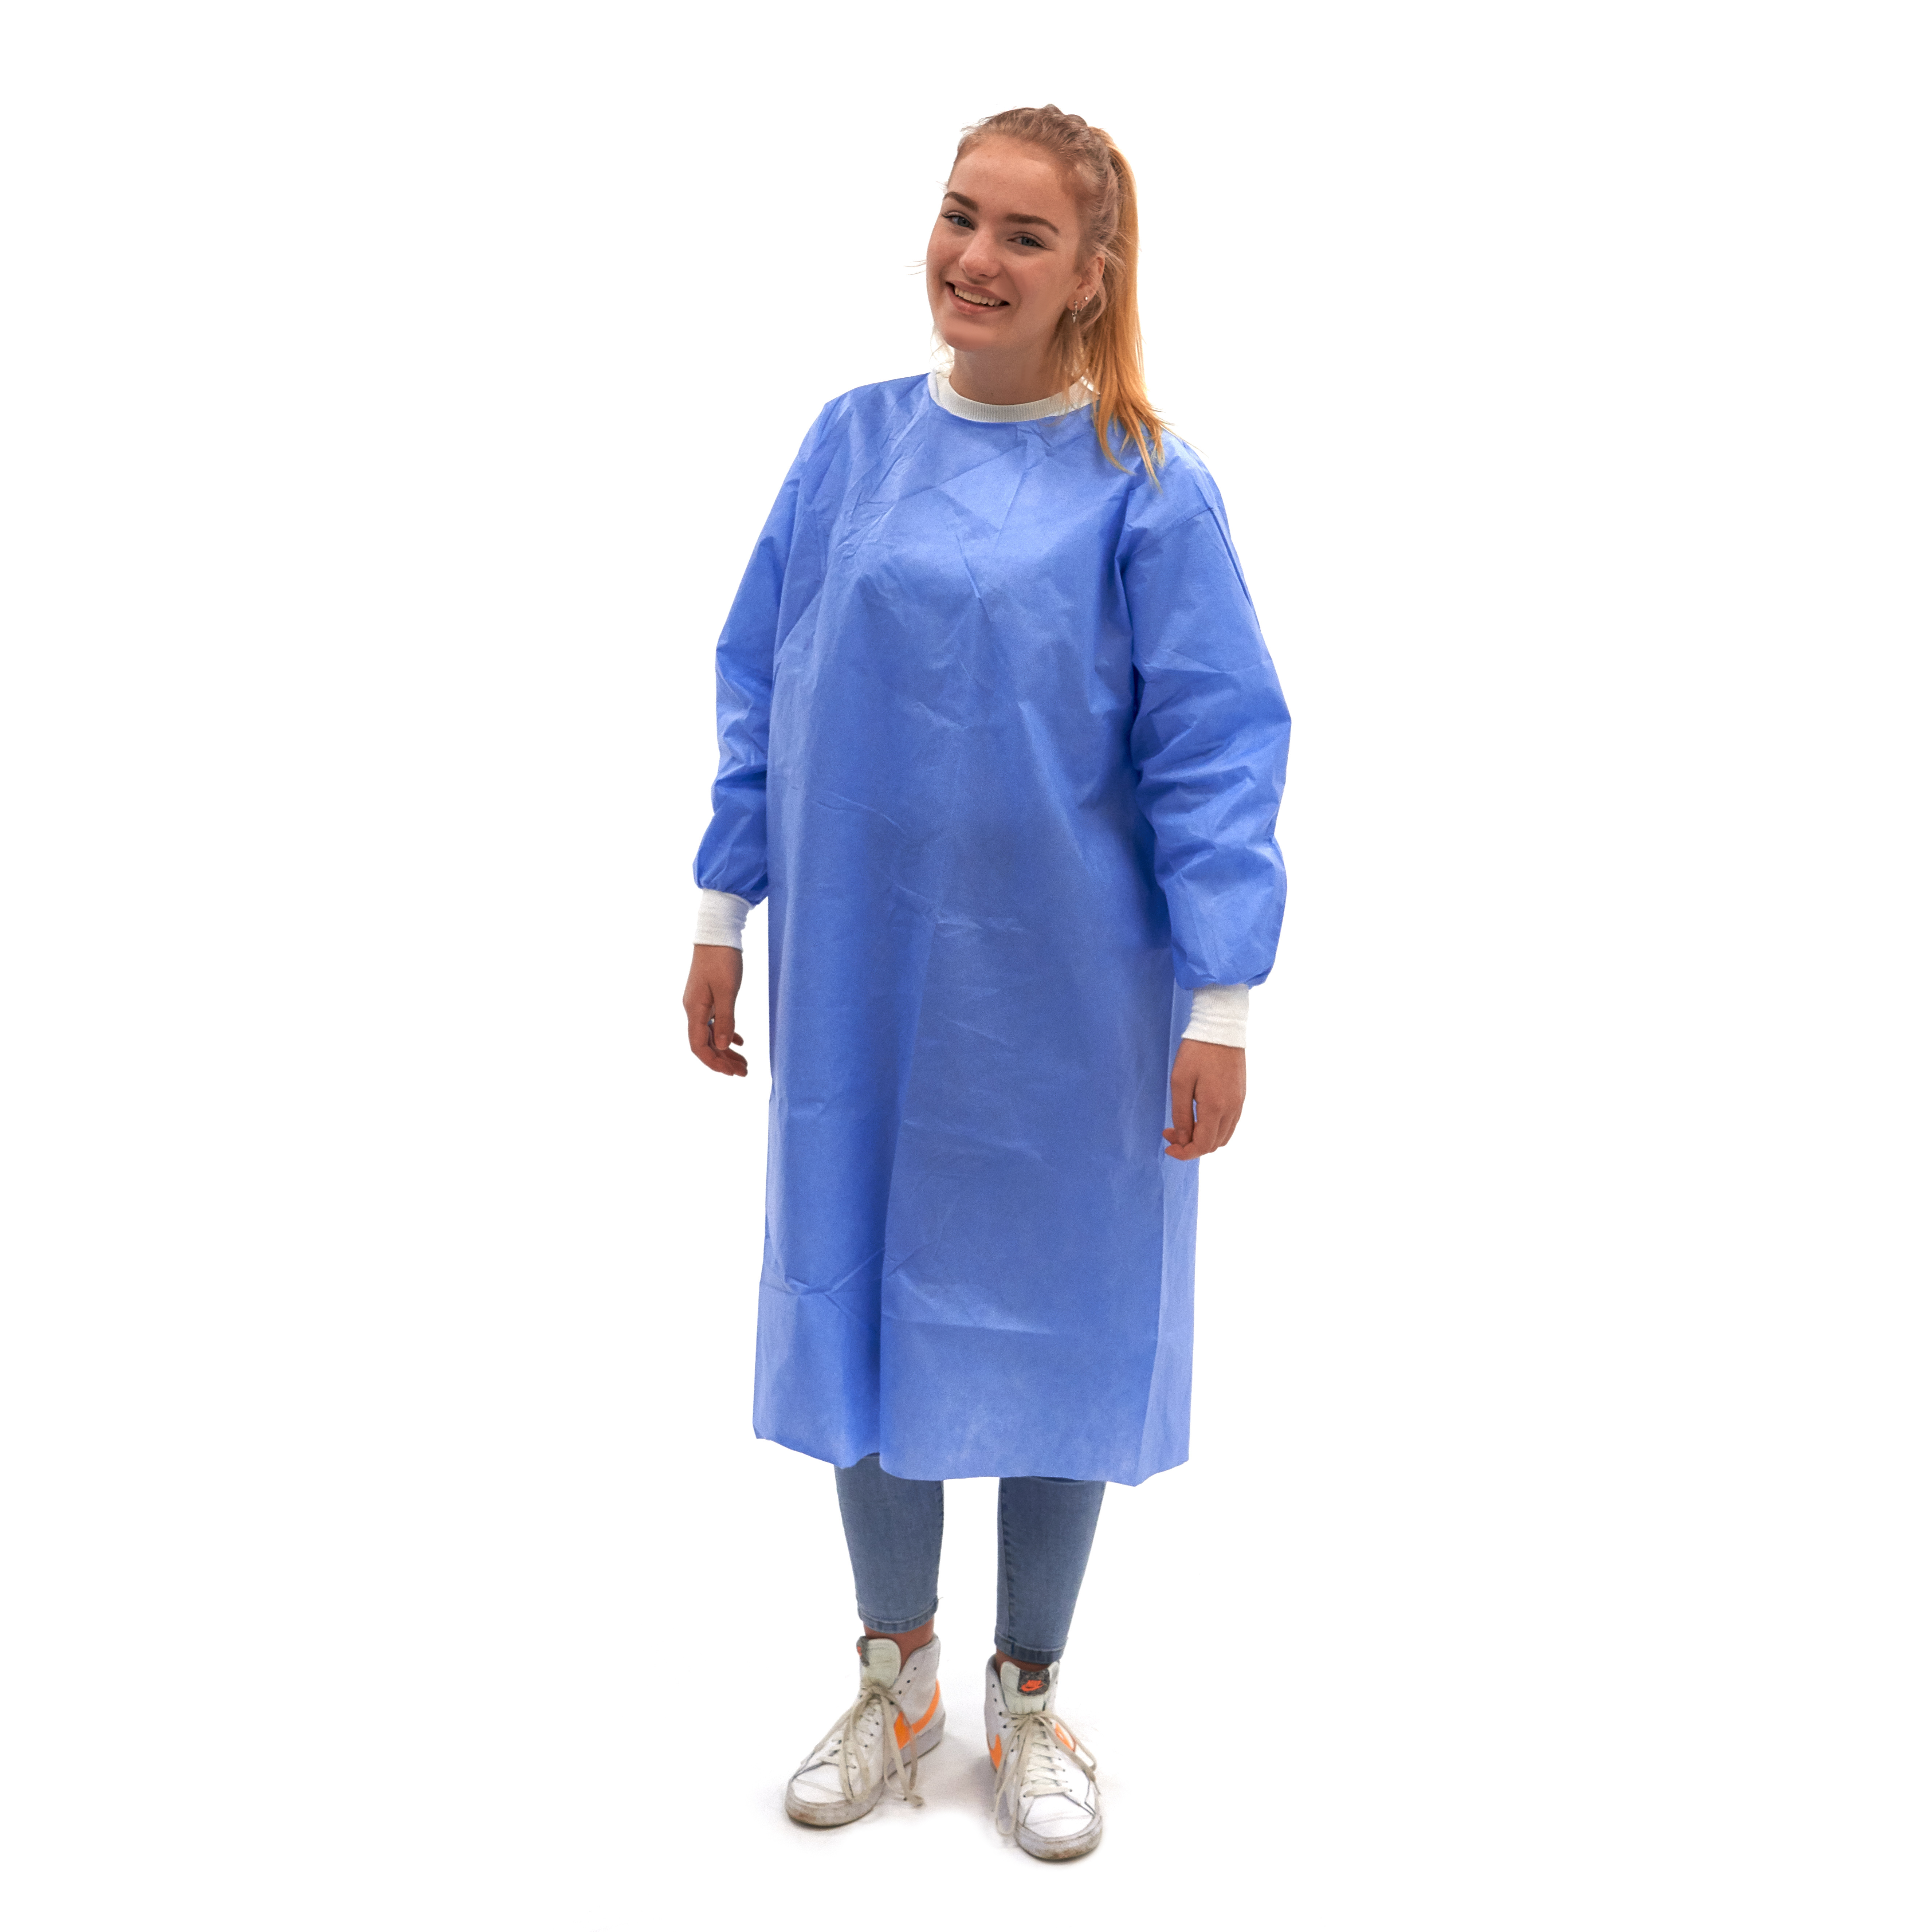 ISO-GOWN-DISP-L Romed Surgical Isolation Gown Spunbond, packed per piece, 80 pieces in an export carton.